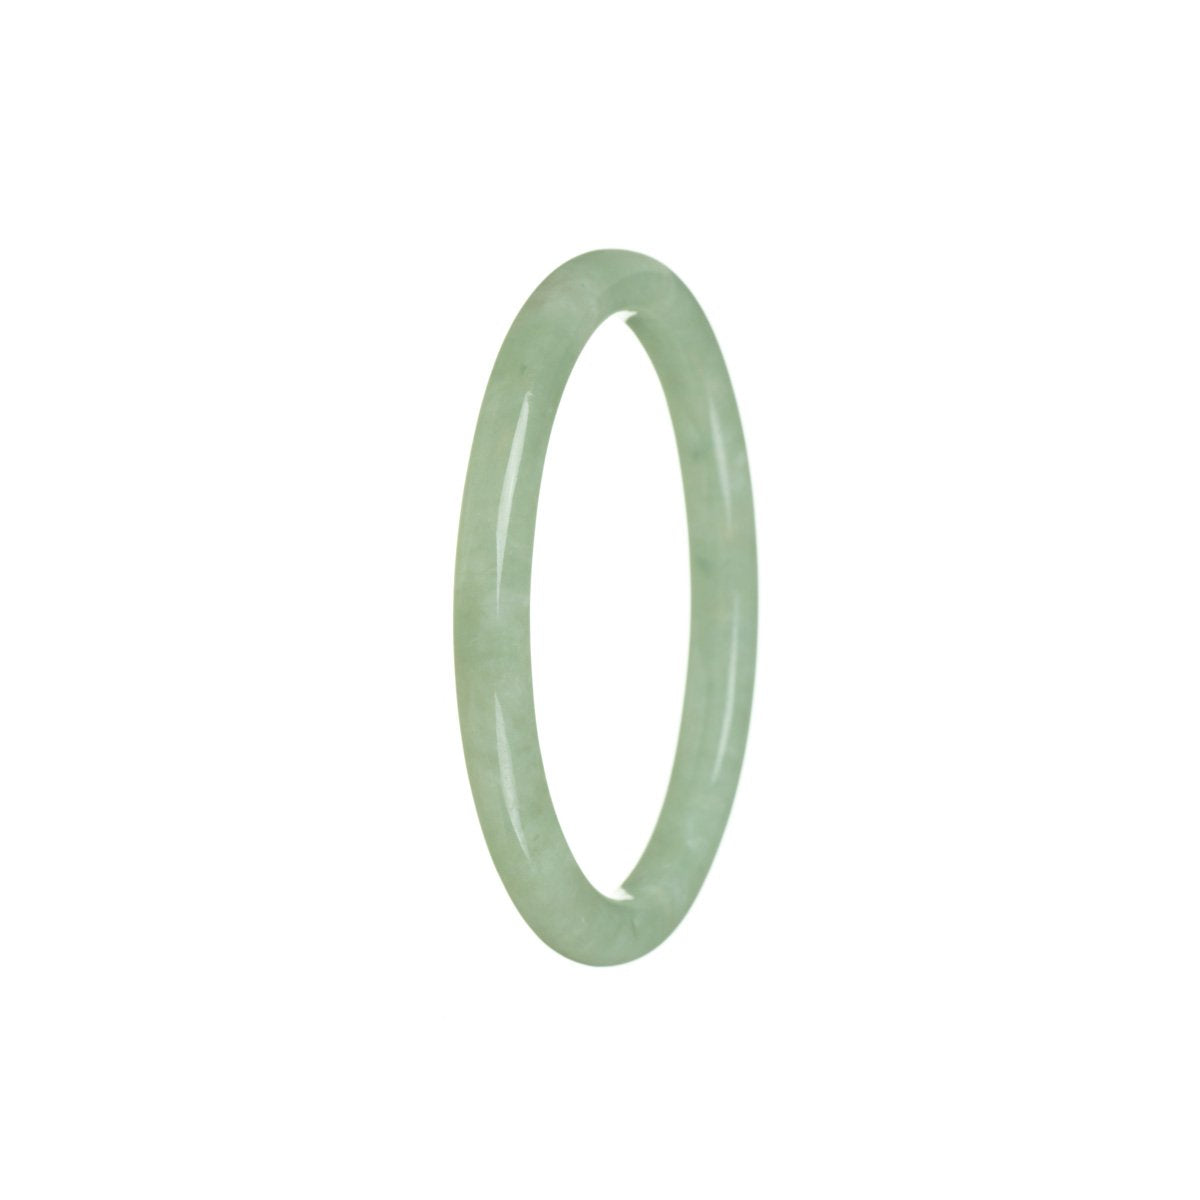 A close-up photo of an oval-shaped, Grade A Green Jade Bangle Bracelet with a glossy, authentic finish. The bracelet has a diameter of 52mm and is crafted by MAYS GEMS.